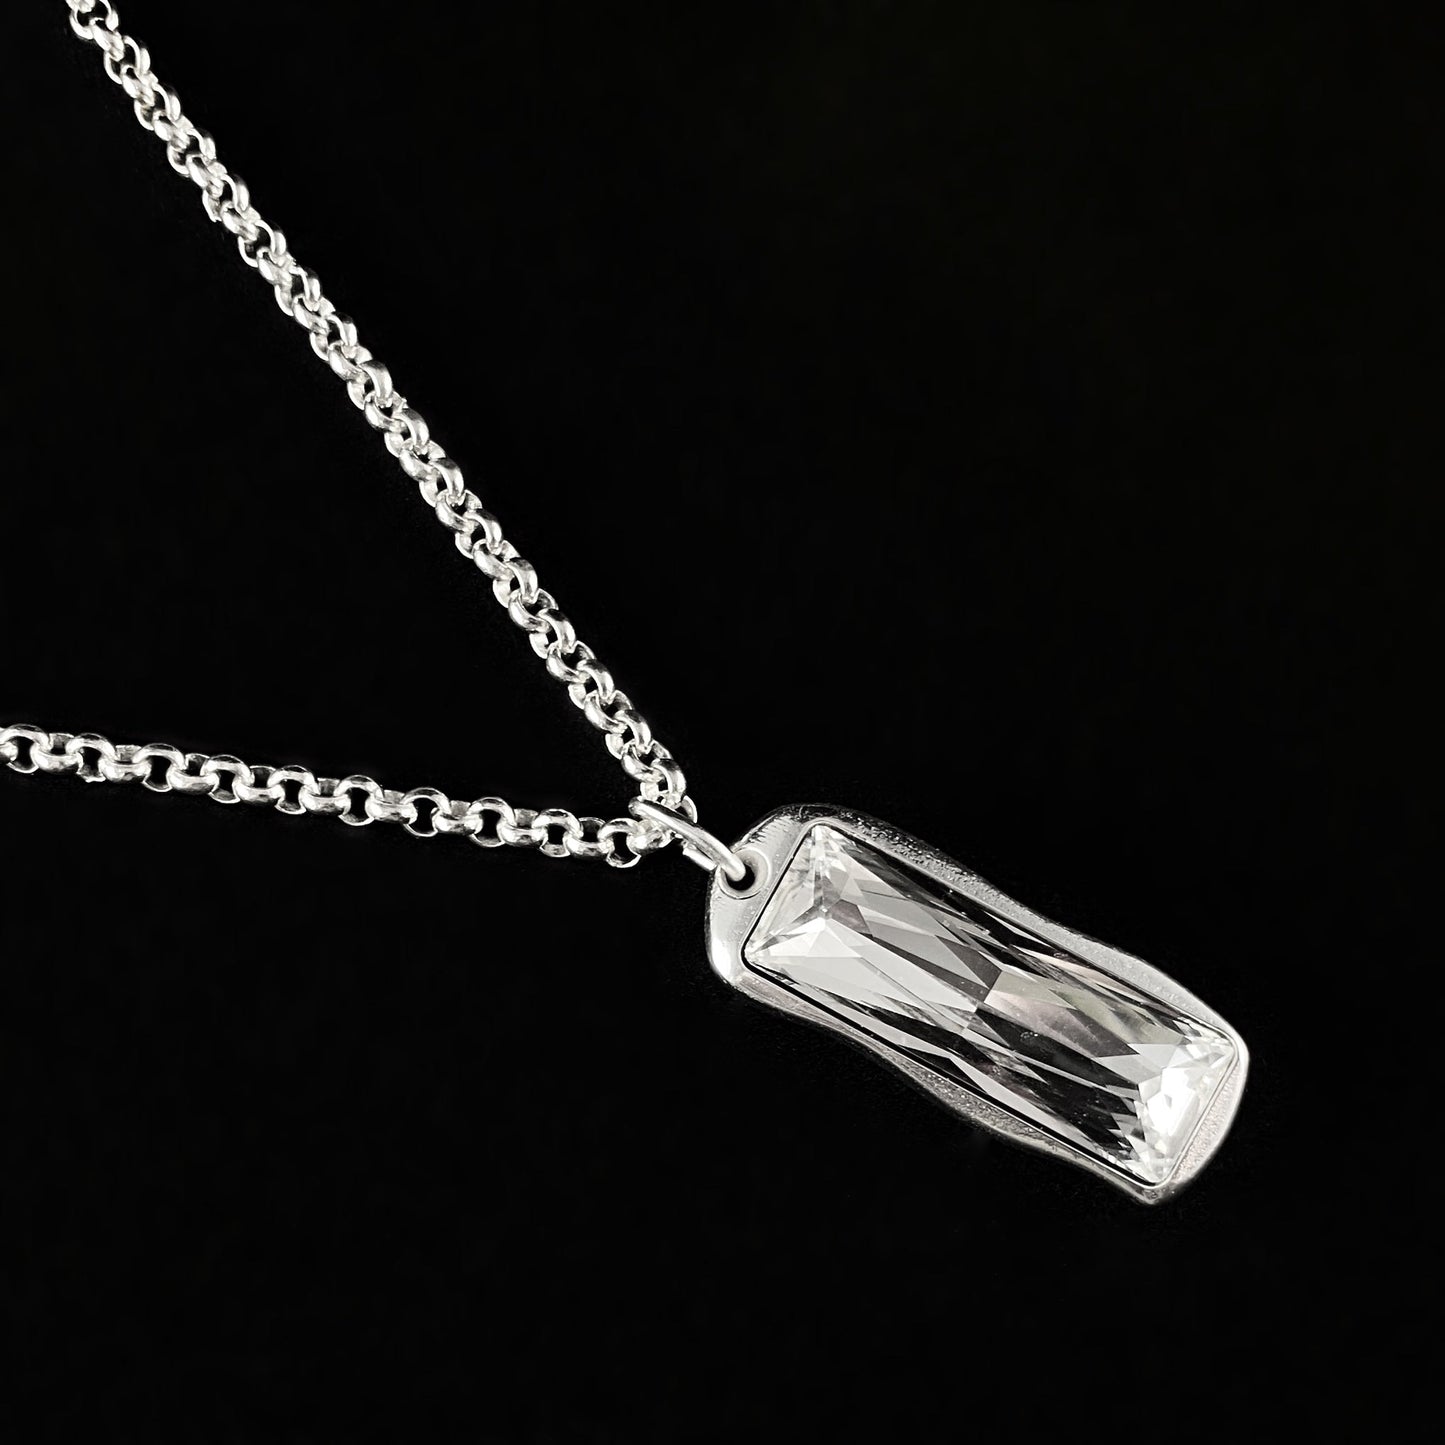 Abstract Rectangular Crystal Statement Pendant on Silver